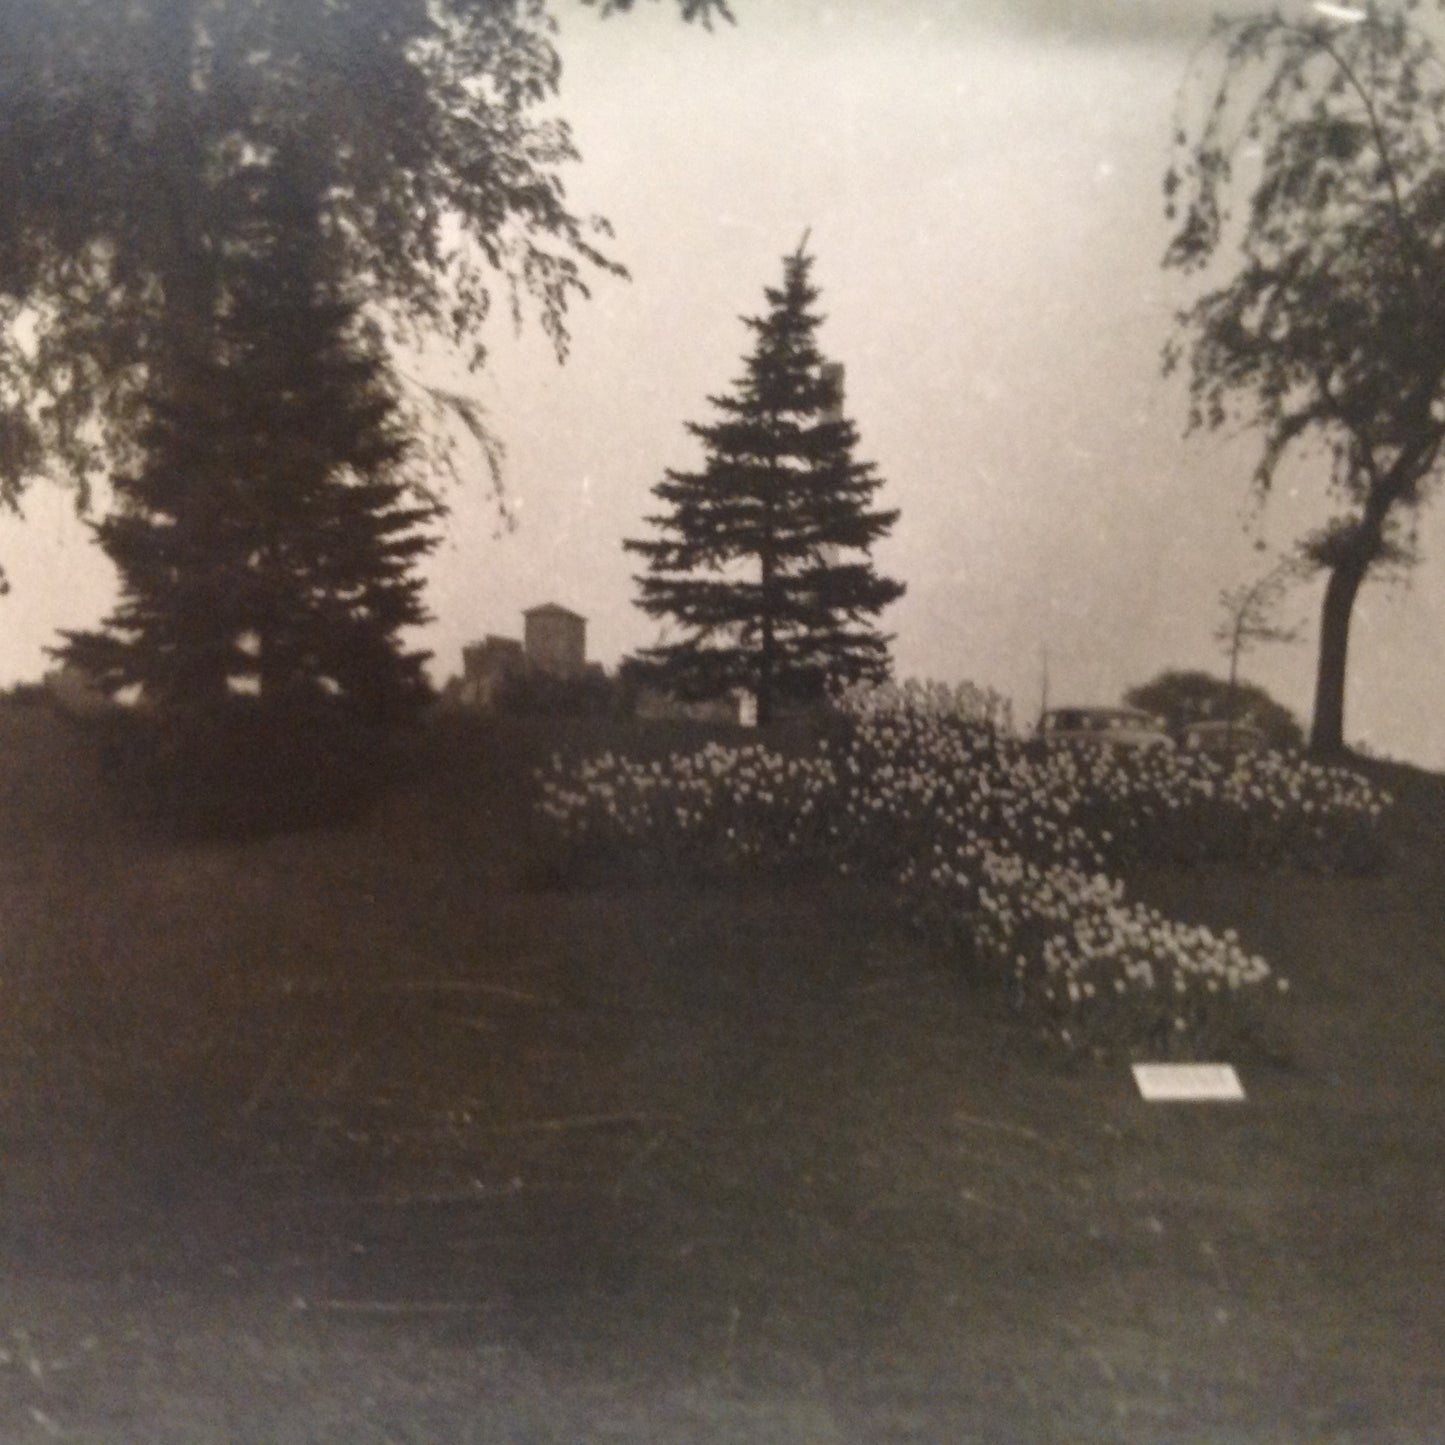 Vintage Mid Century B&W Photo Holland Michigan Tulip Festival Flower Garden with Pines and Weeping Willow